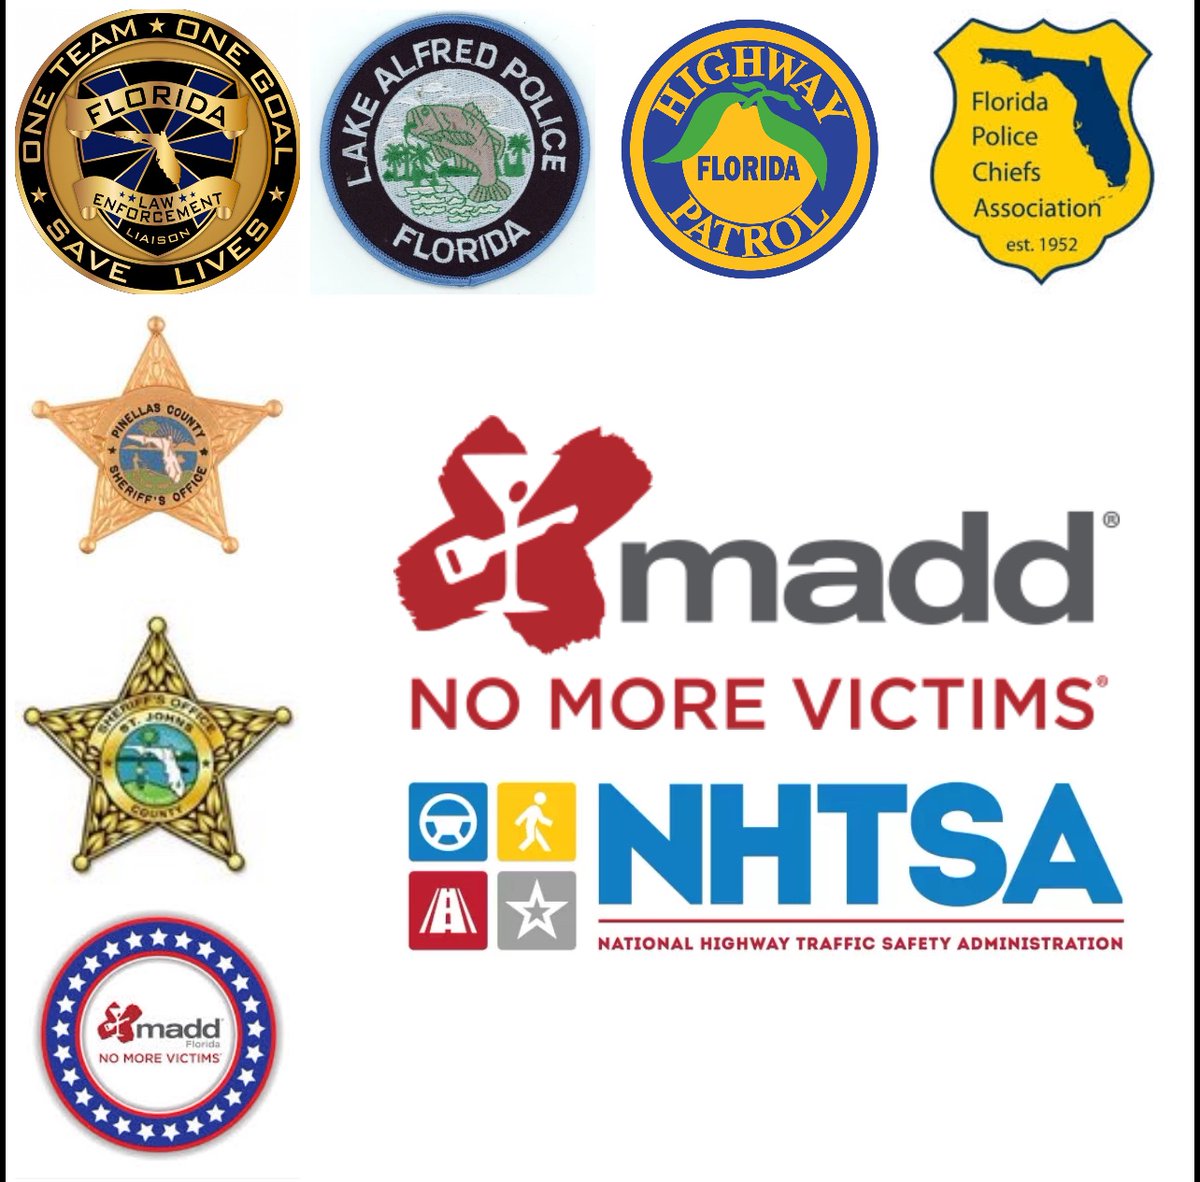 MADD FL along with representatives from @FloridaChiefs @FloridaLEL @FHPJacksonville @FHPTampa @SheriffPinellas @SJSOPIO #LakeAlfredPD at the @NHTSAgov @MADDNational Region 4 Summit